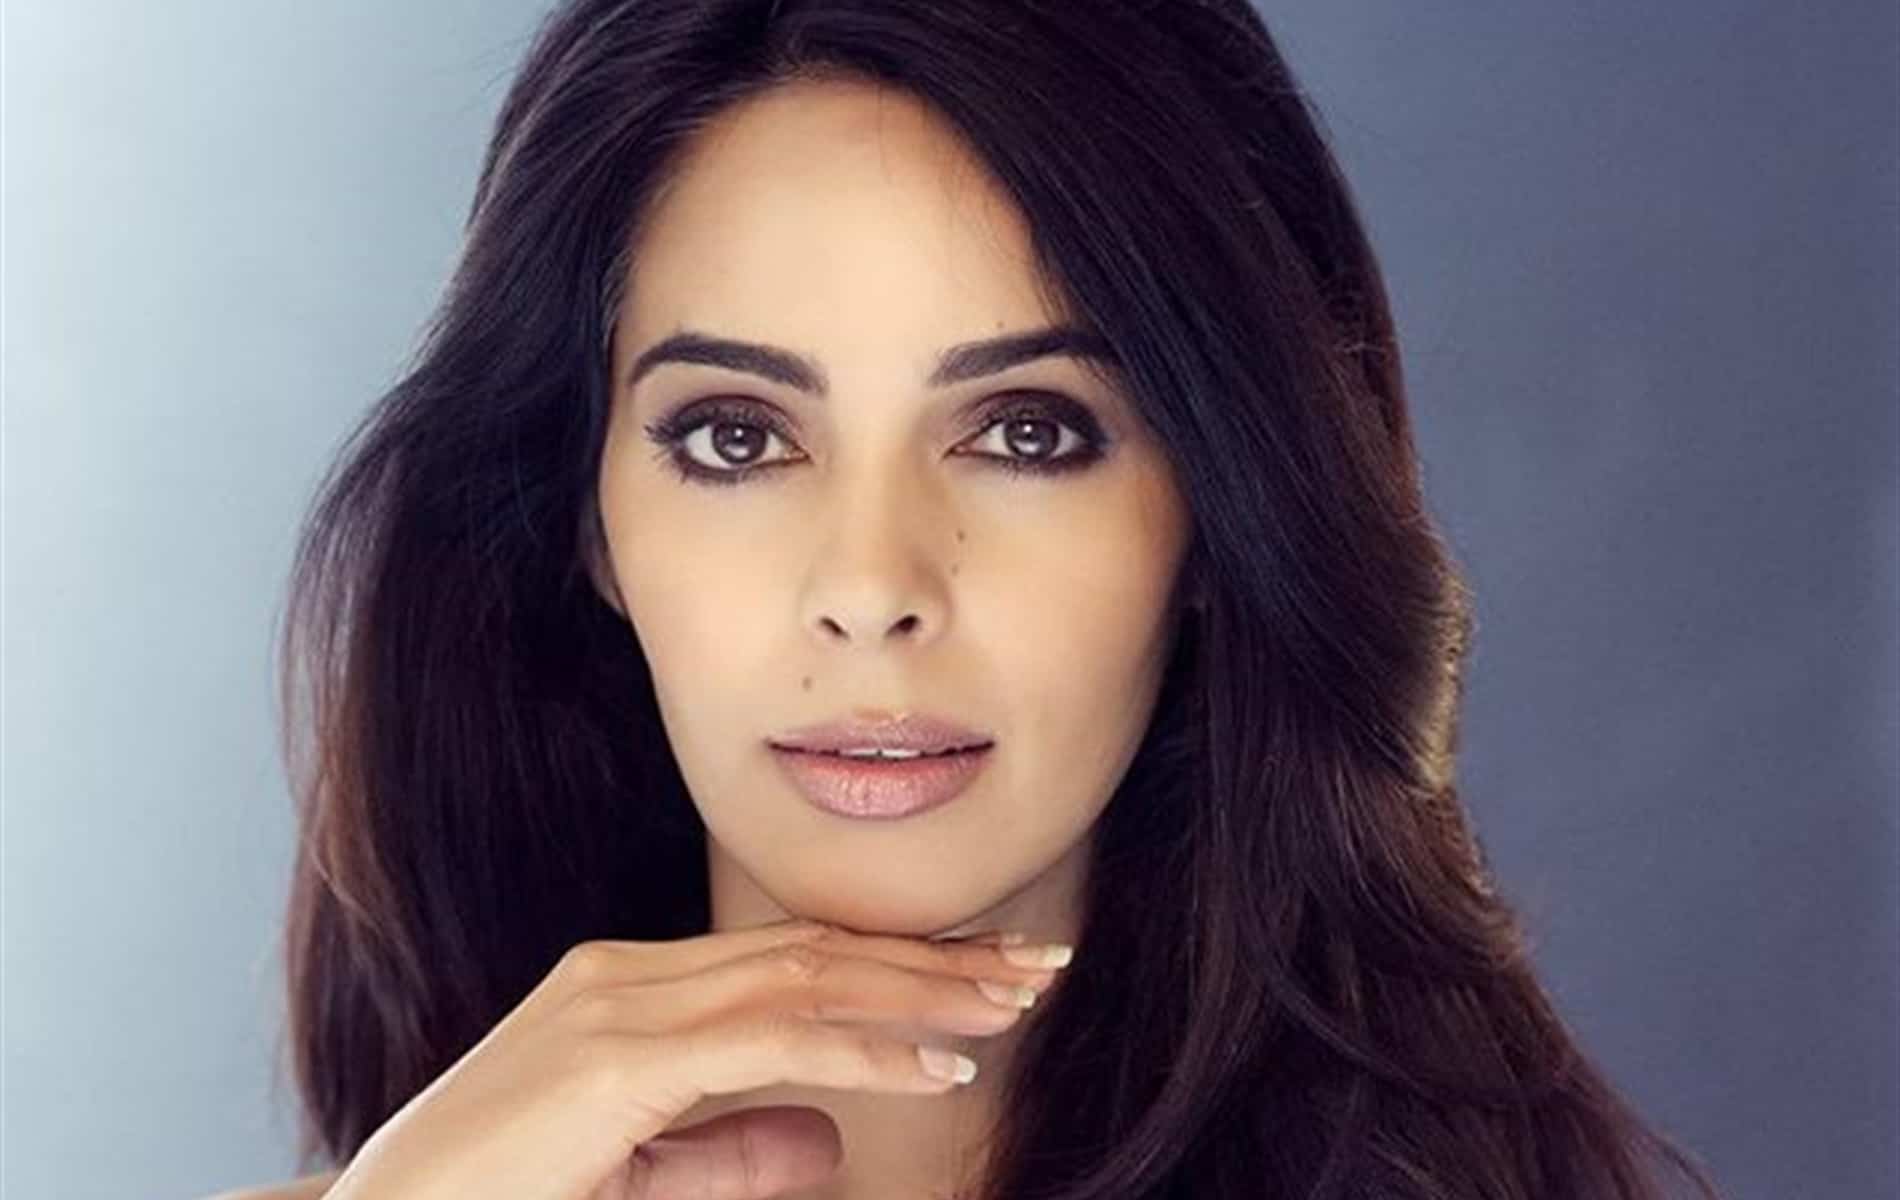 Mallika Sherawat changed her name after dad said &quot;she'd tarnish family name  if entered Bollywood&quot; - Prag News